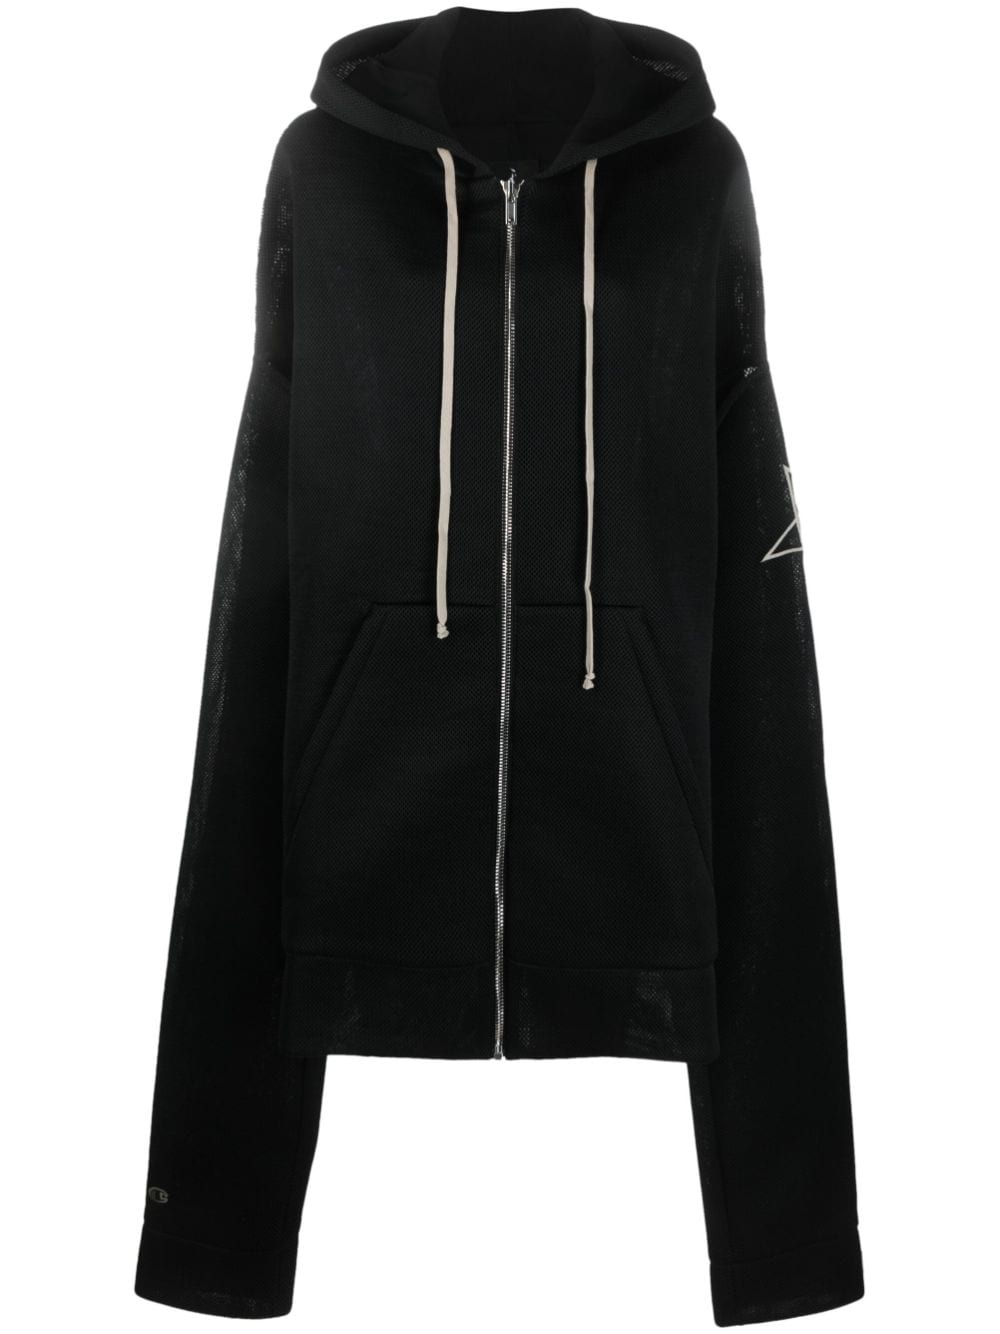 RICK OWENS X CHAMPION Oversized Zip-Up Hoodie in Black for Women - FW23 Collection